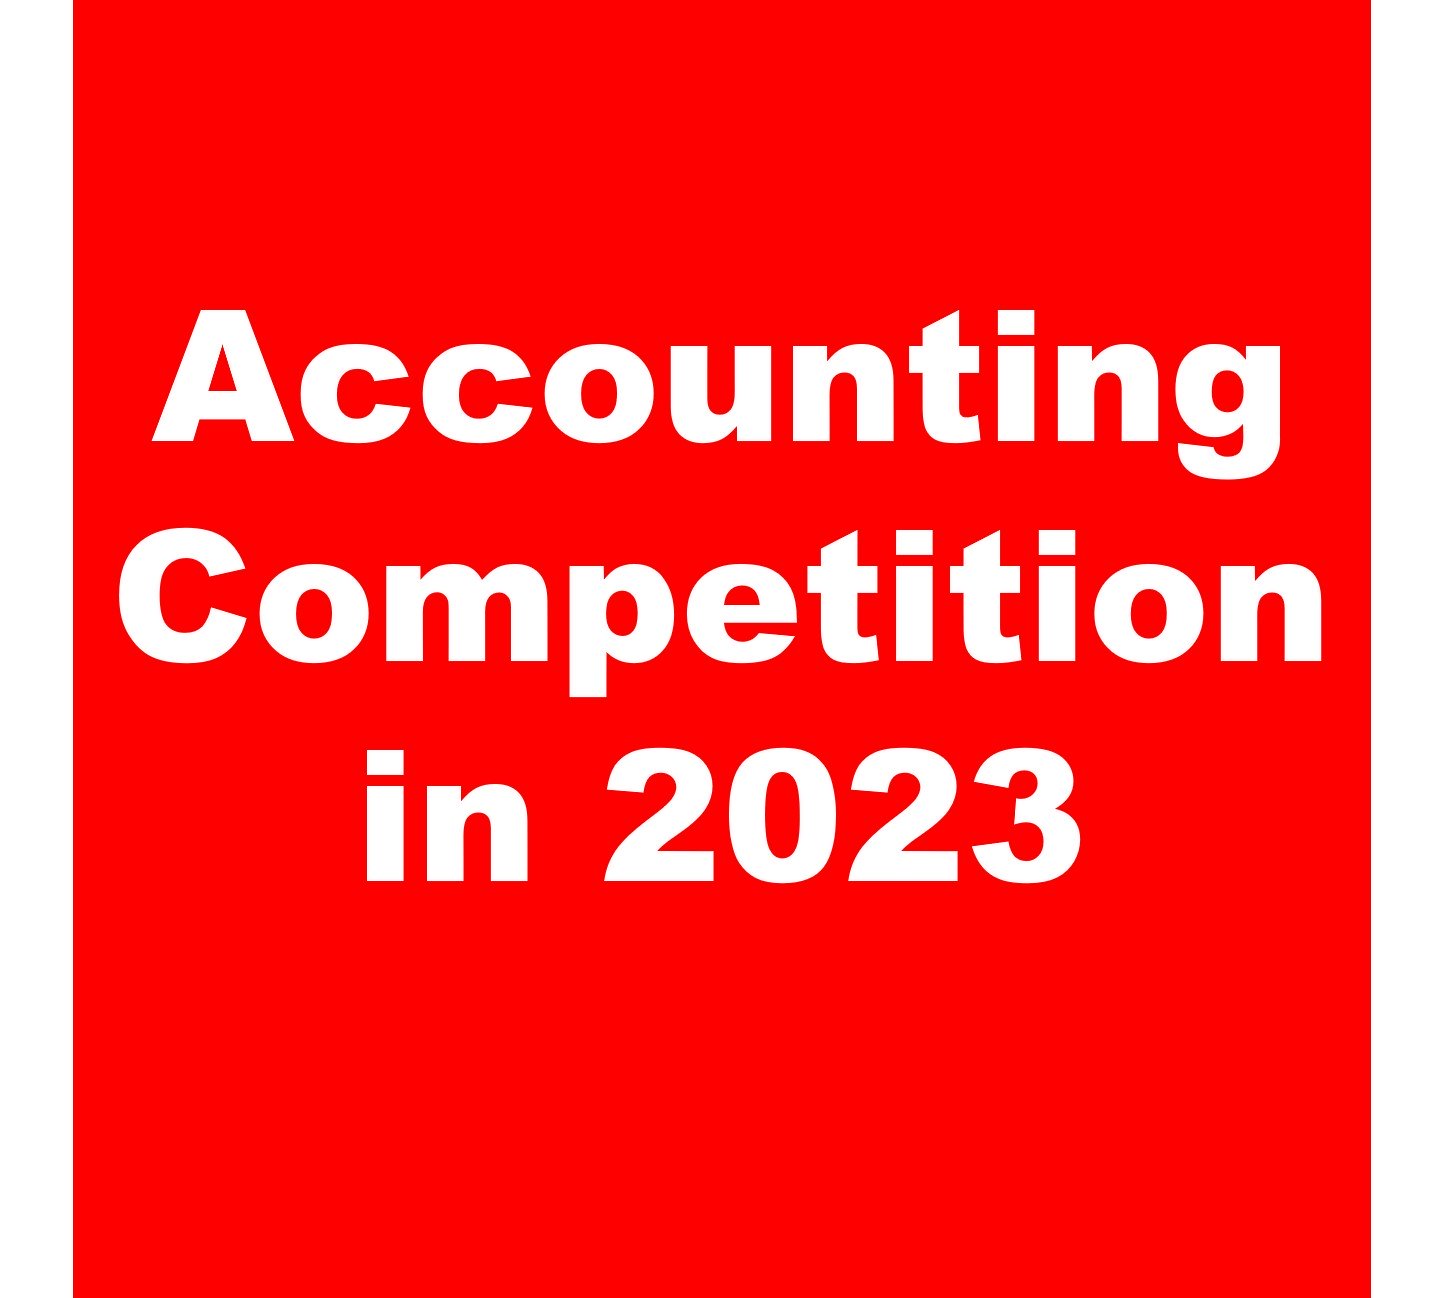 Accounting Competition in 2023